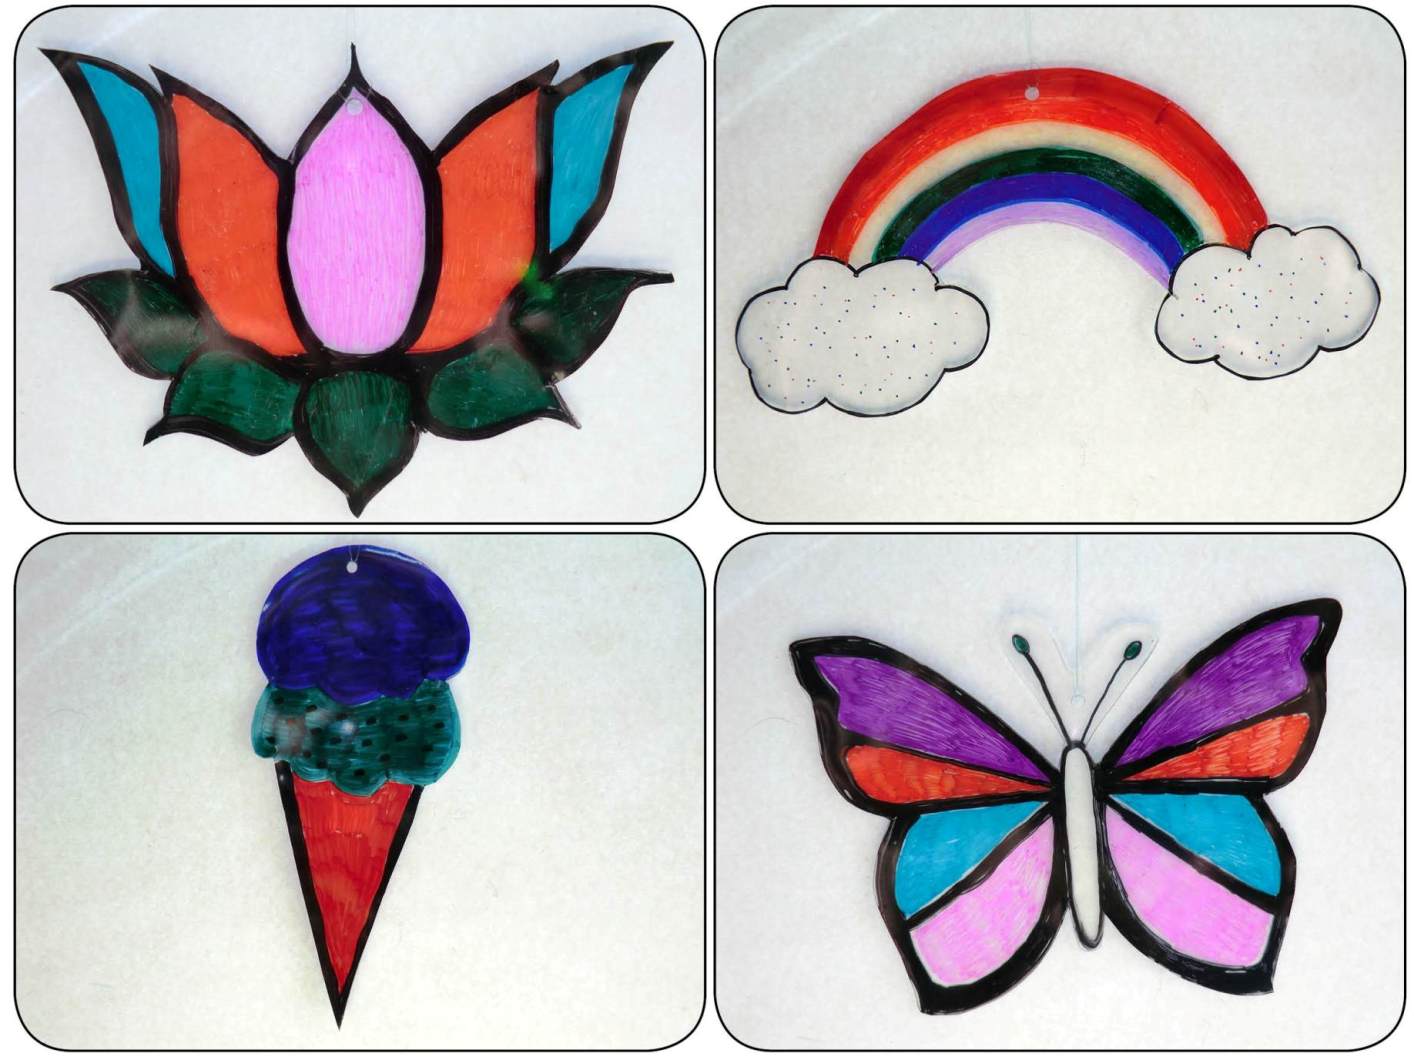 Shrinky Dink to your heart’s delight Saturdays in July